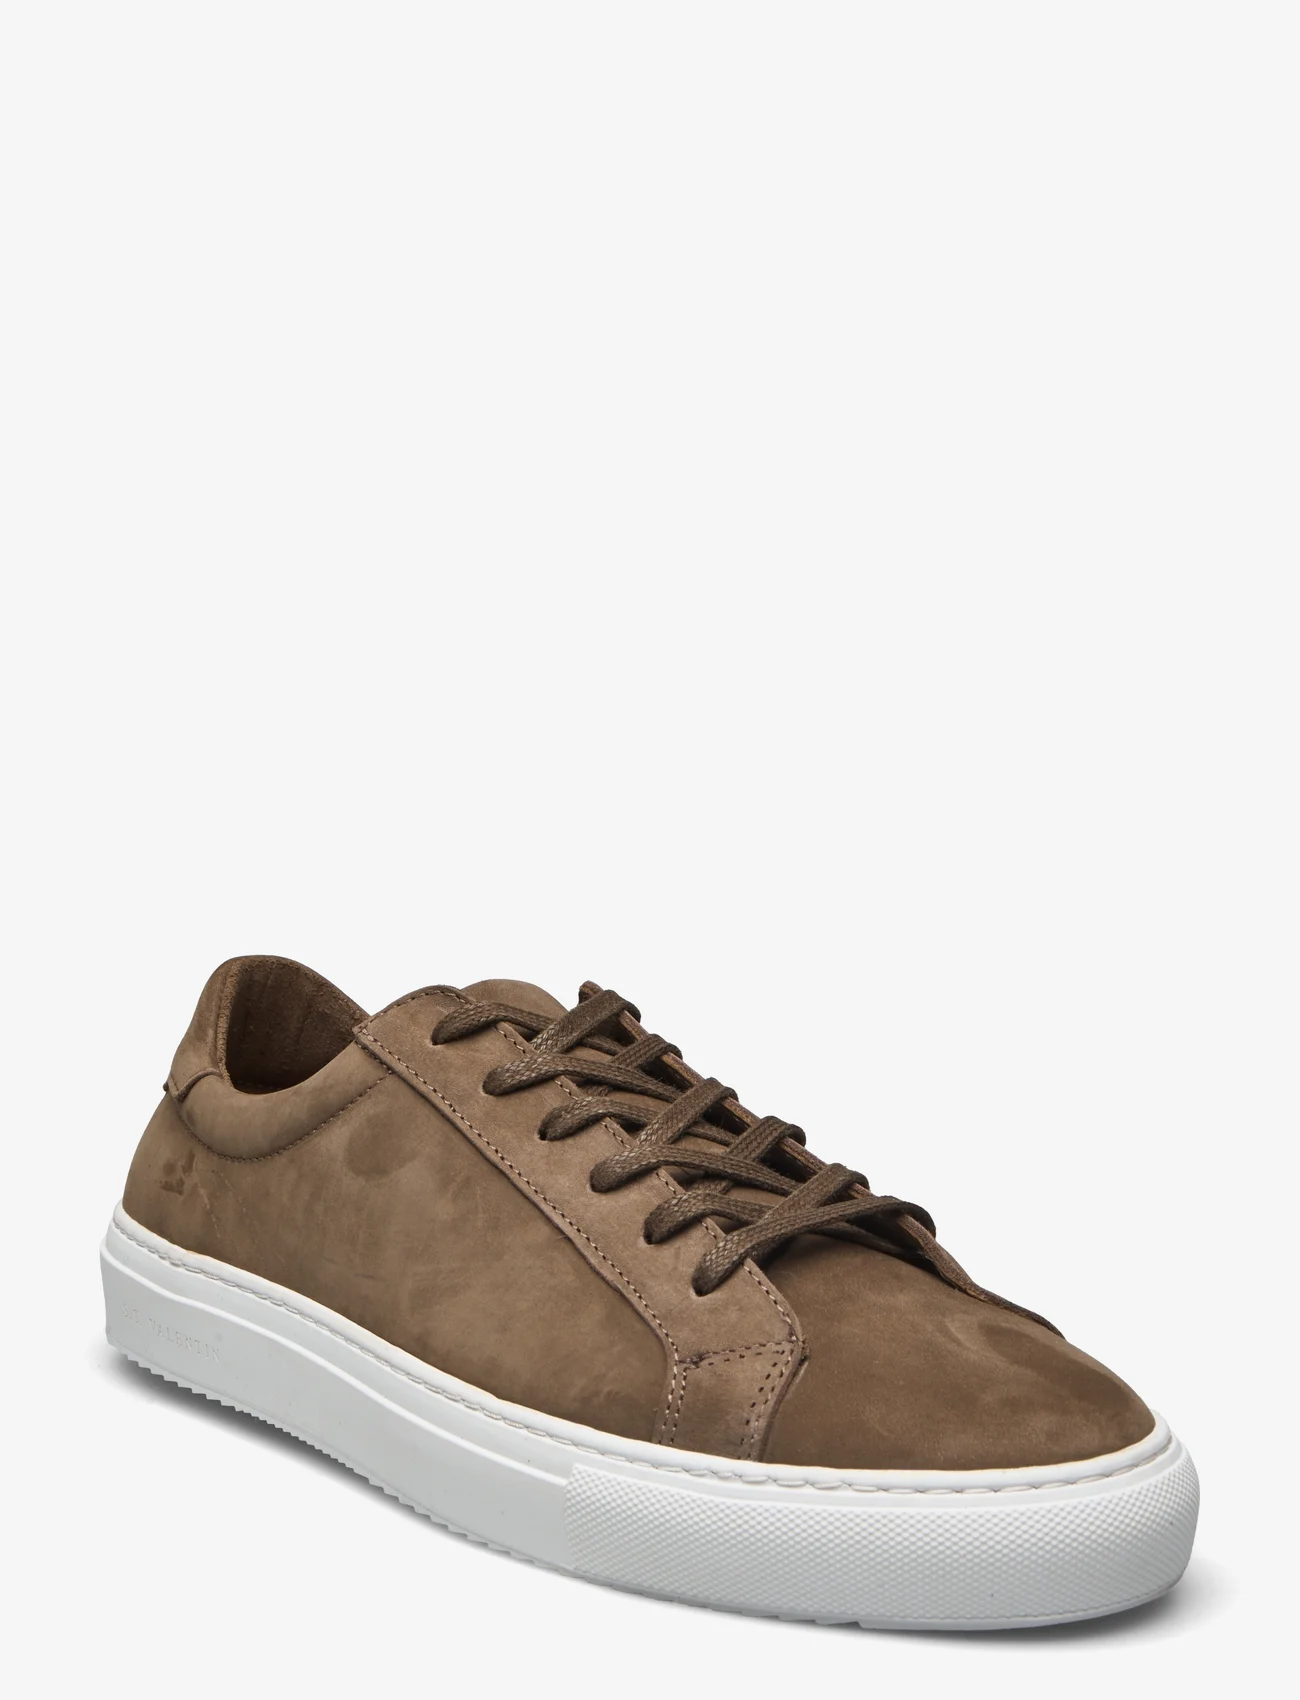 S.T. VALENTIN - Classic Sneaker -Grained leather - lave sneakers - taupe - 0